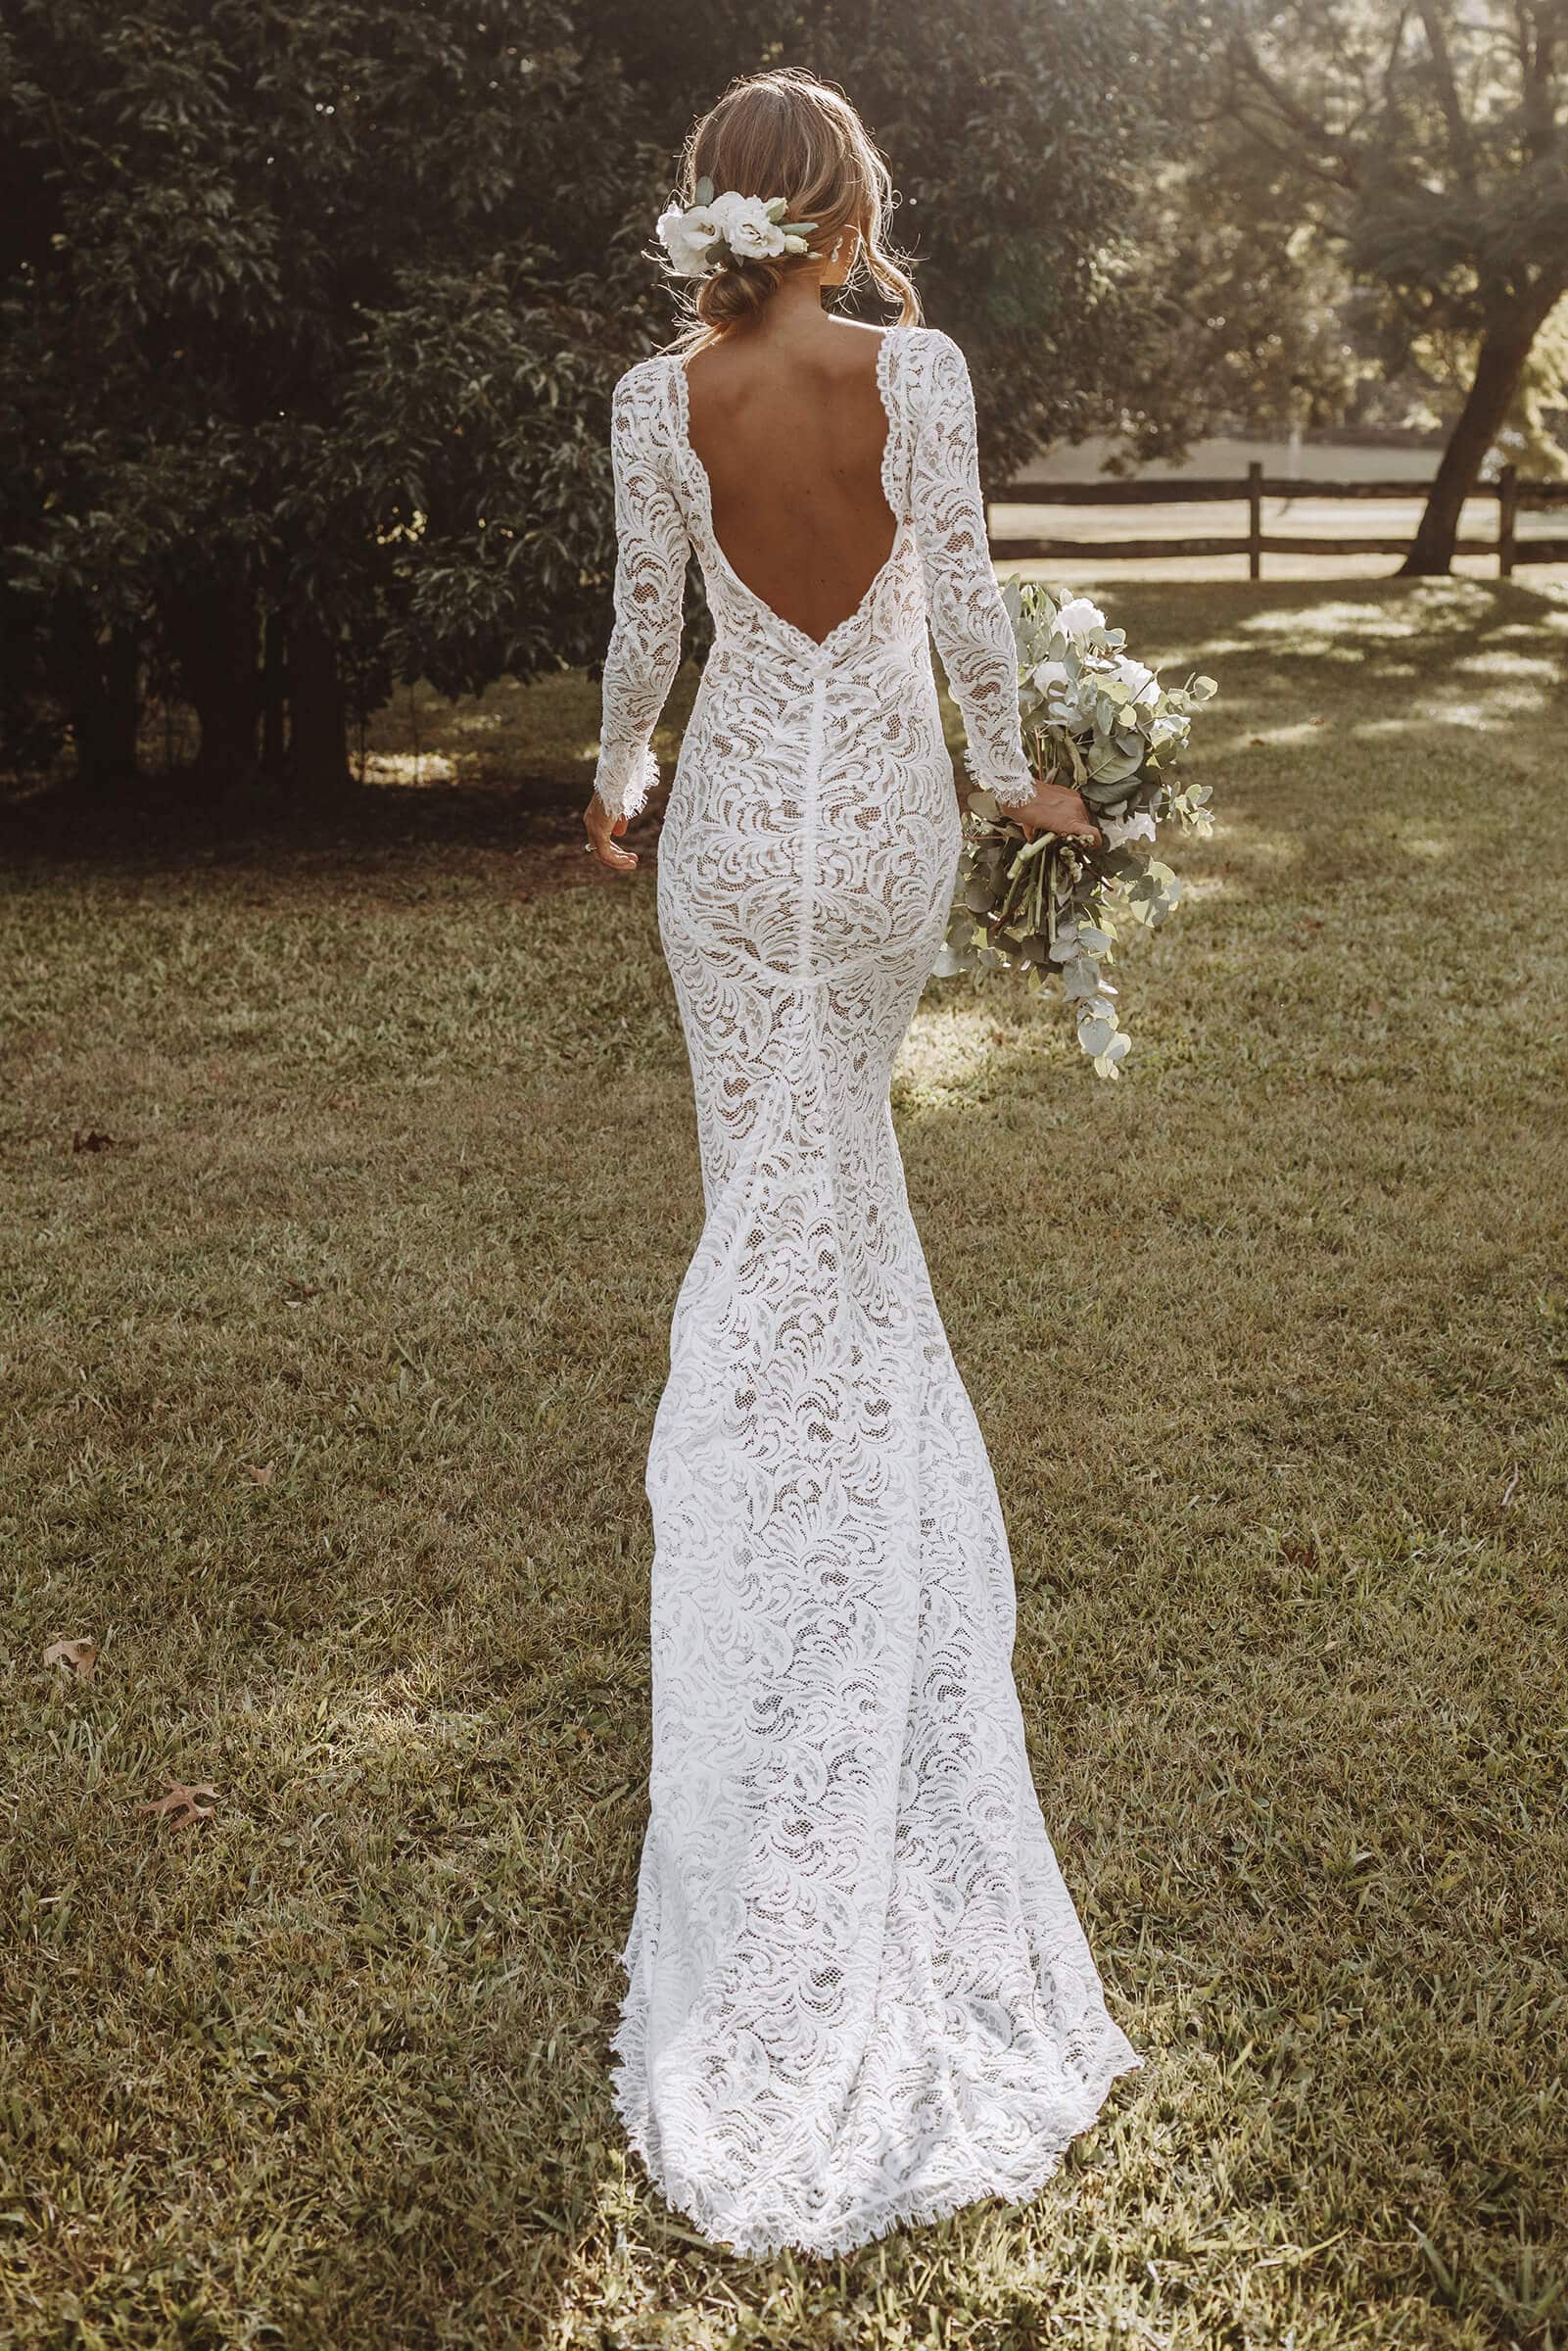 pictures of the wedding dress